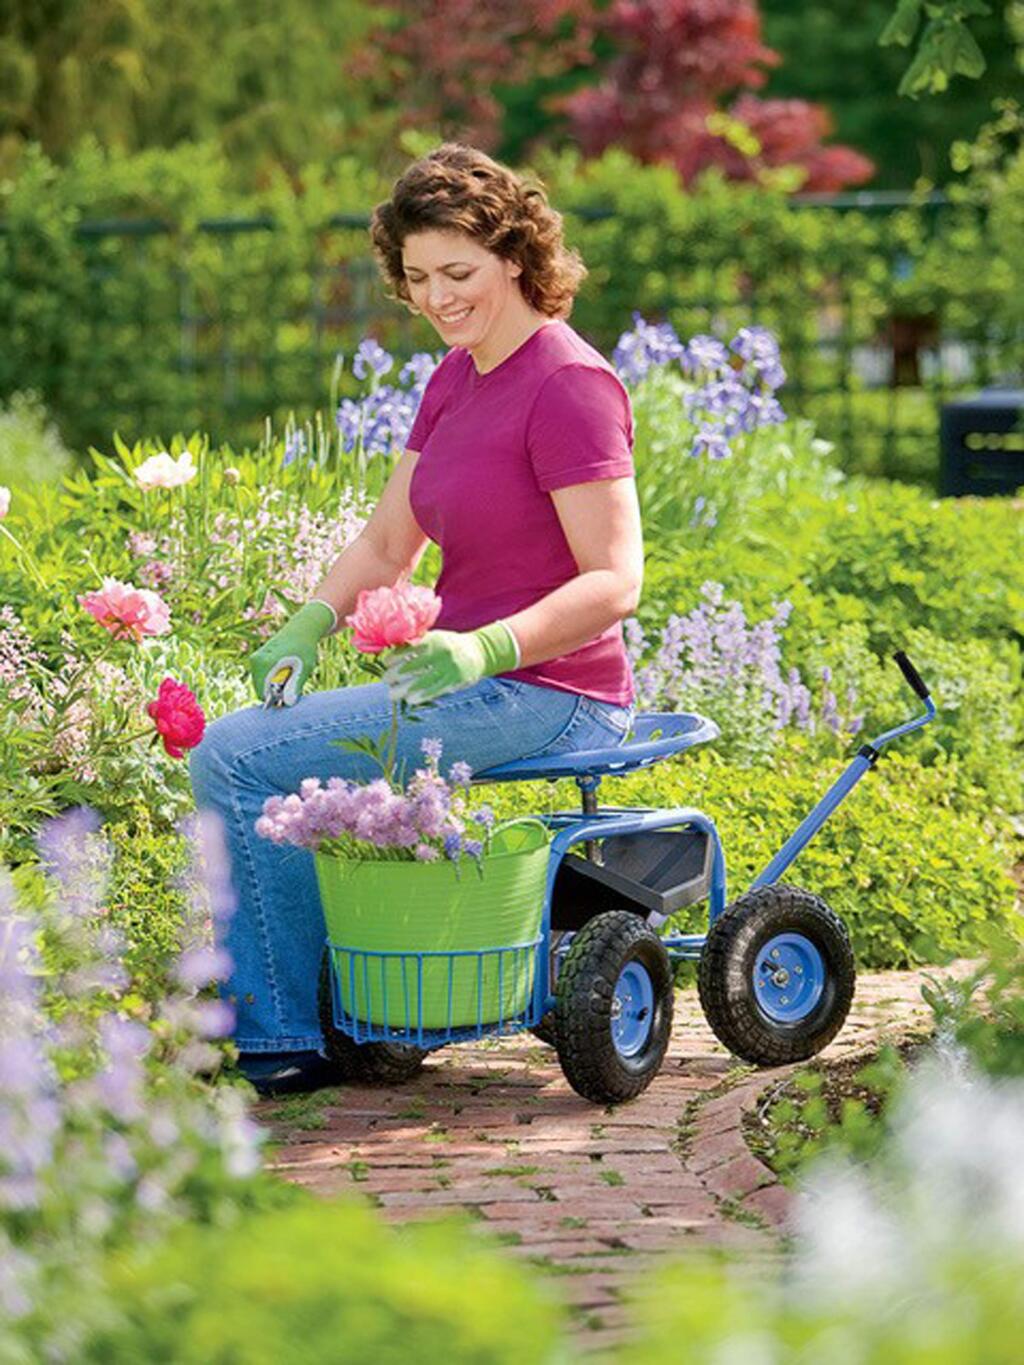 This tractor scoot allows you to work from a seated position, minimizing strain on back and knees, and has a height-adjustable seat. (TONI GATTONE)